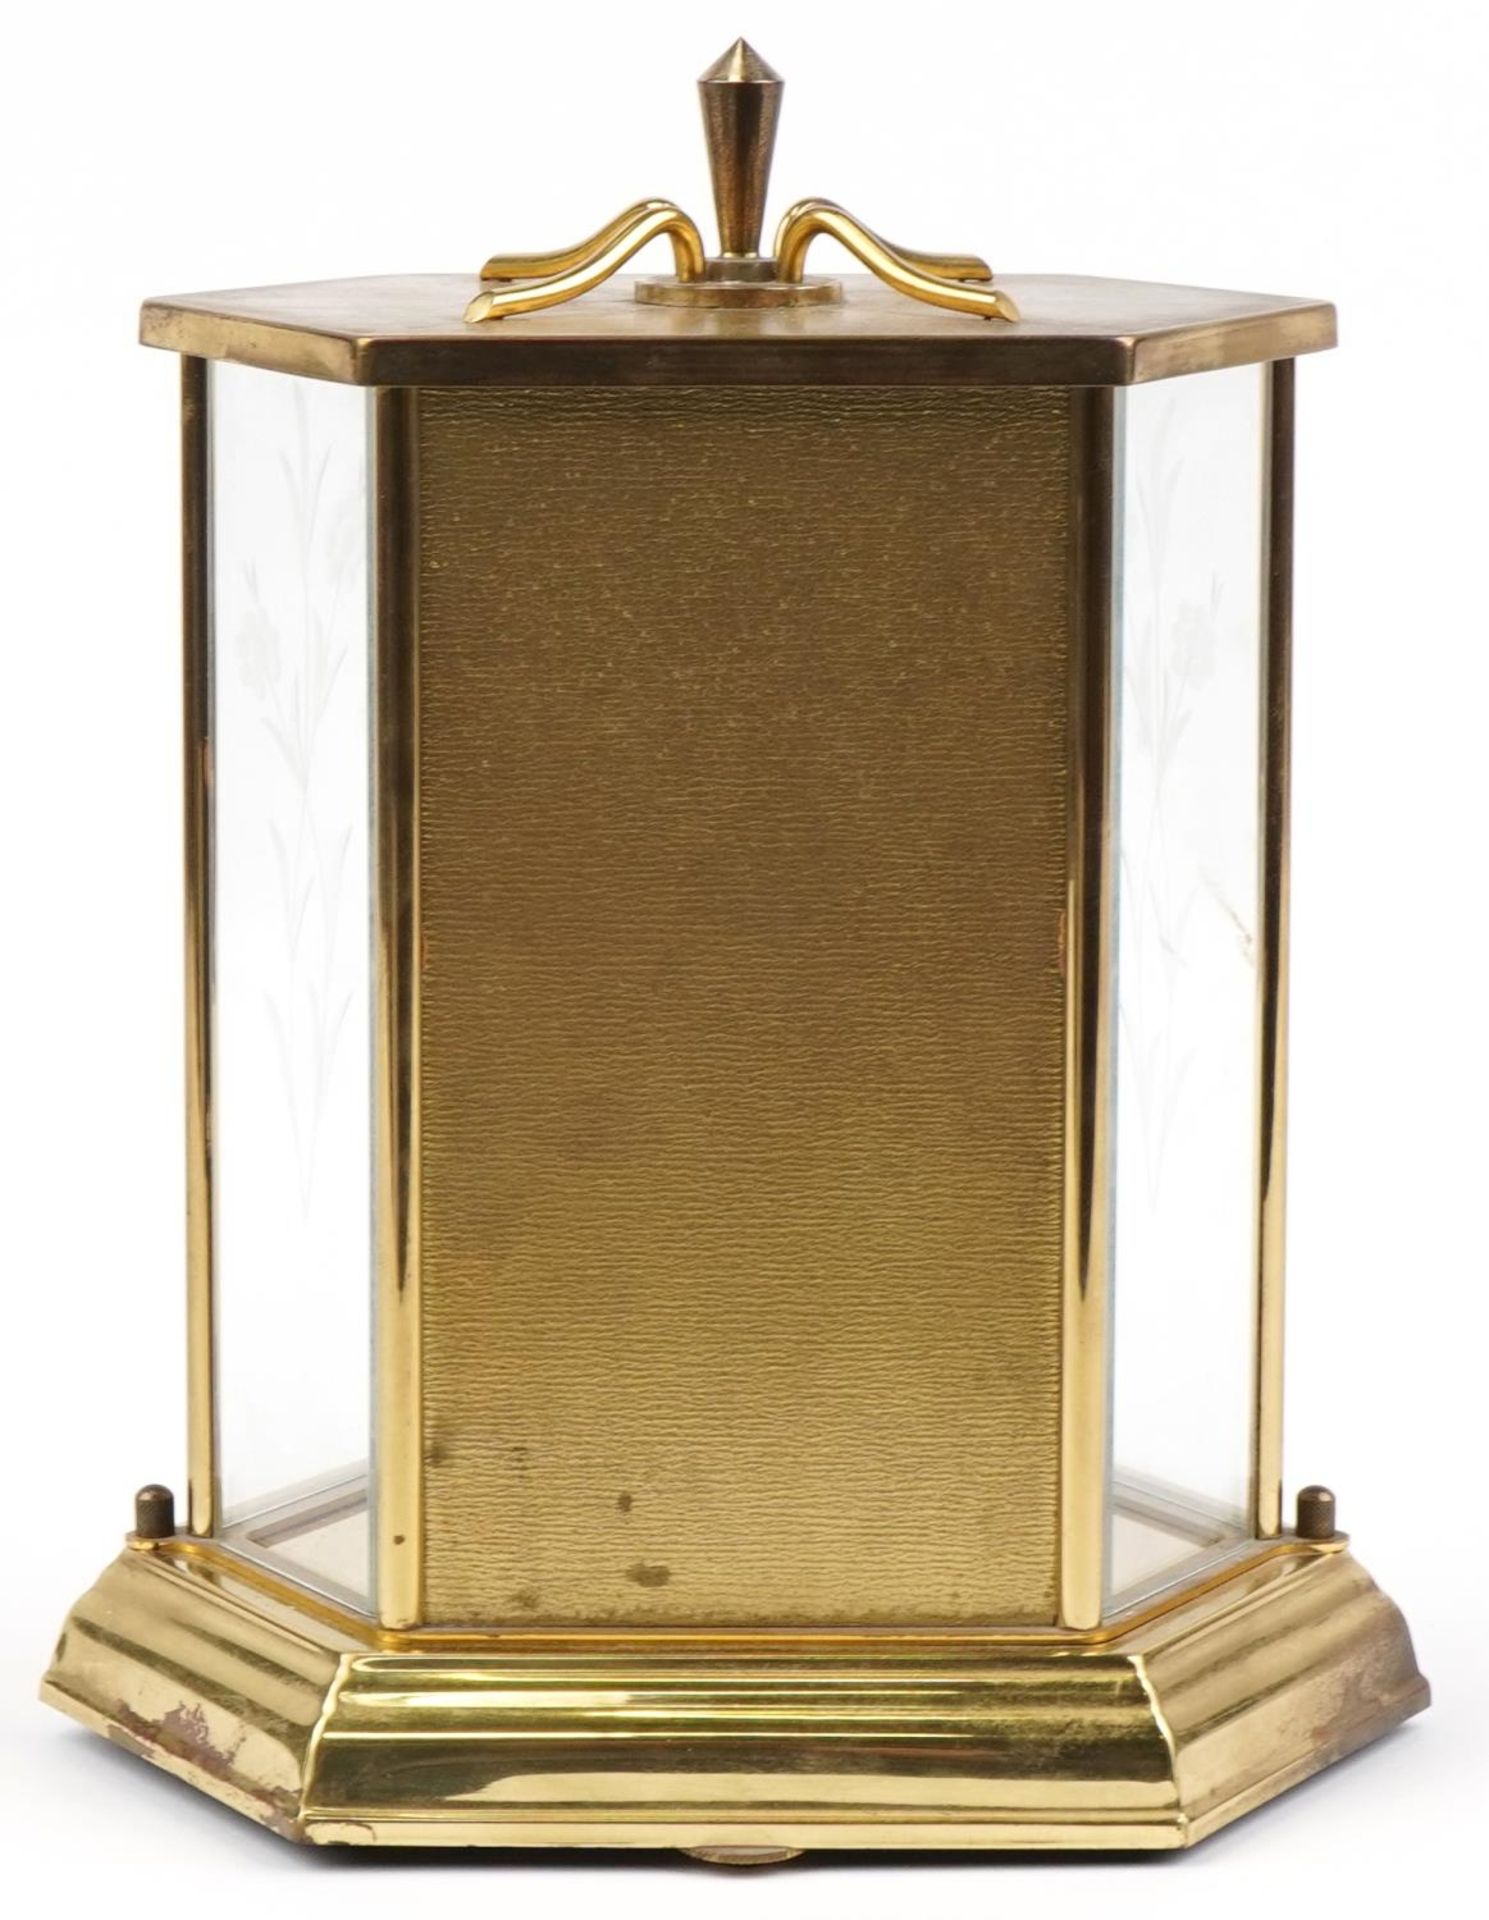 Kundo brass cased anniversary clock with bevelled glass panels, 25.5cm high : For further - Image 4 of 4